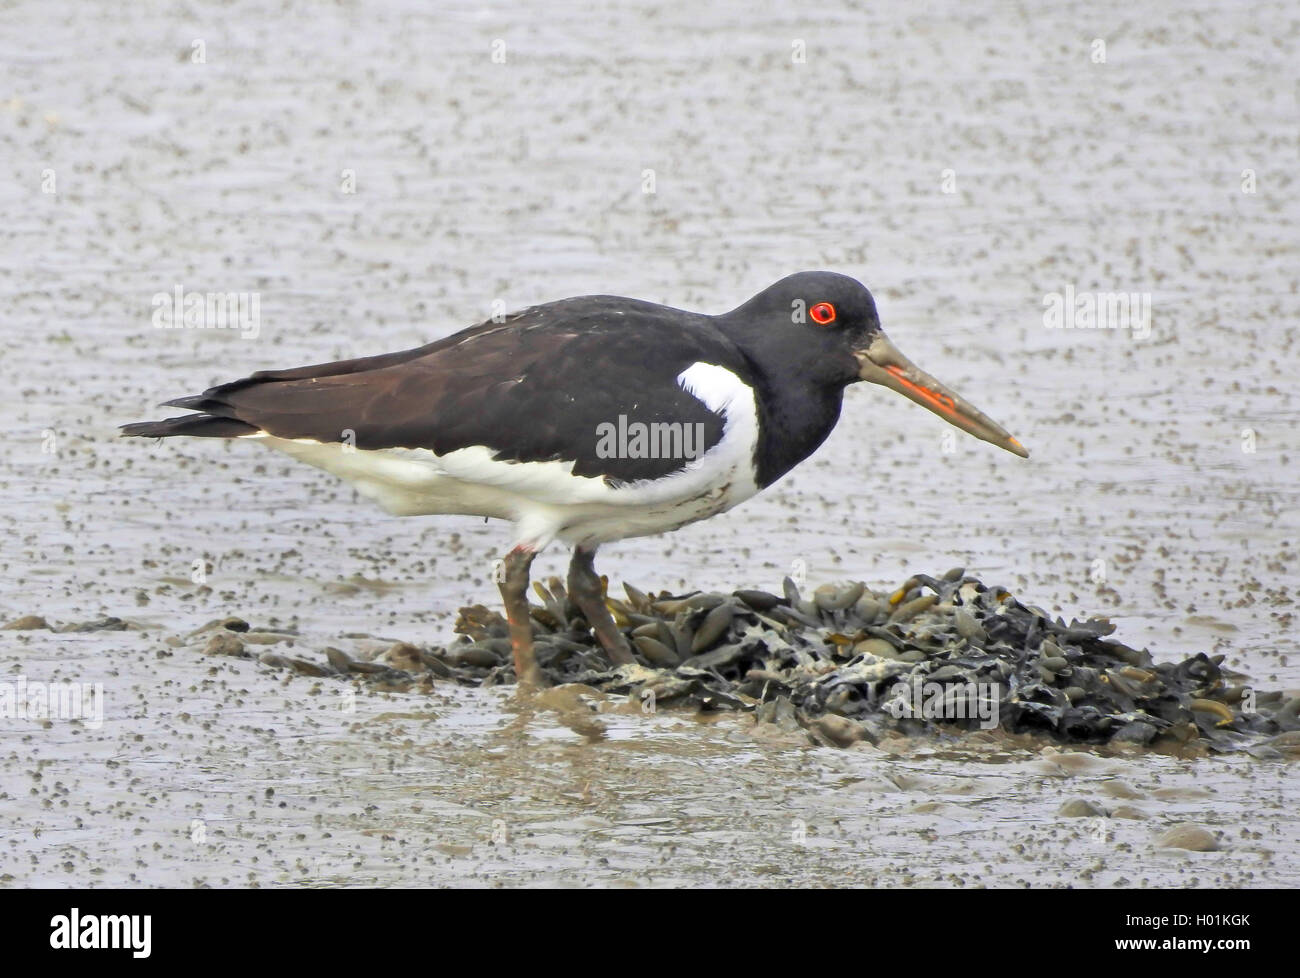 palaearctic oystercatcher (Haematopus ostralegus), searching food on the beach, side view, Germany, Schleswig-Holstein, Hallig Hooge Stock Photo